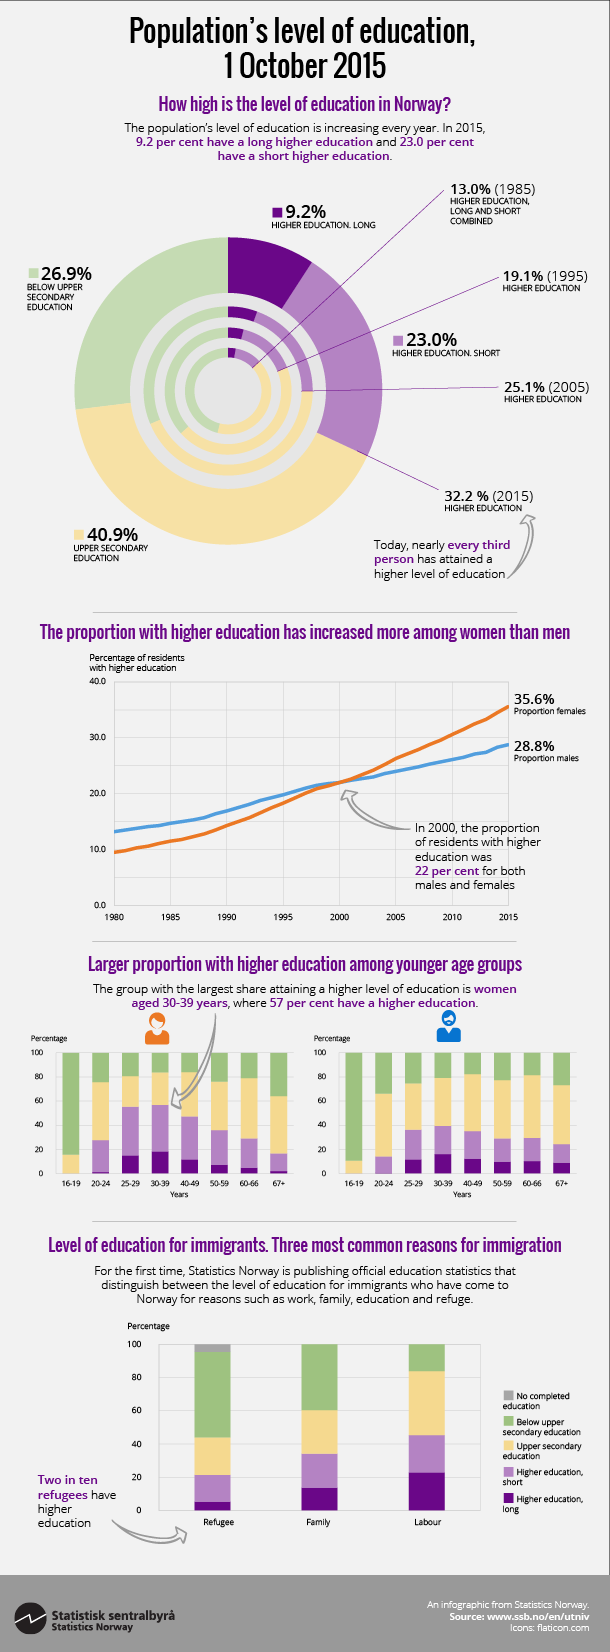 Figure. The population's level of education, 1 October 2015. Click on image for larger version.